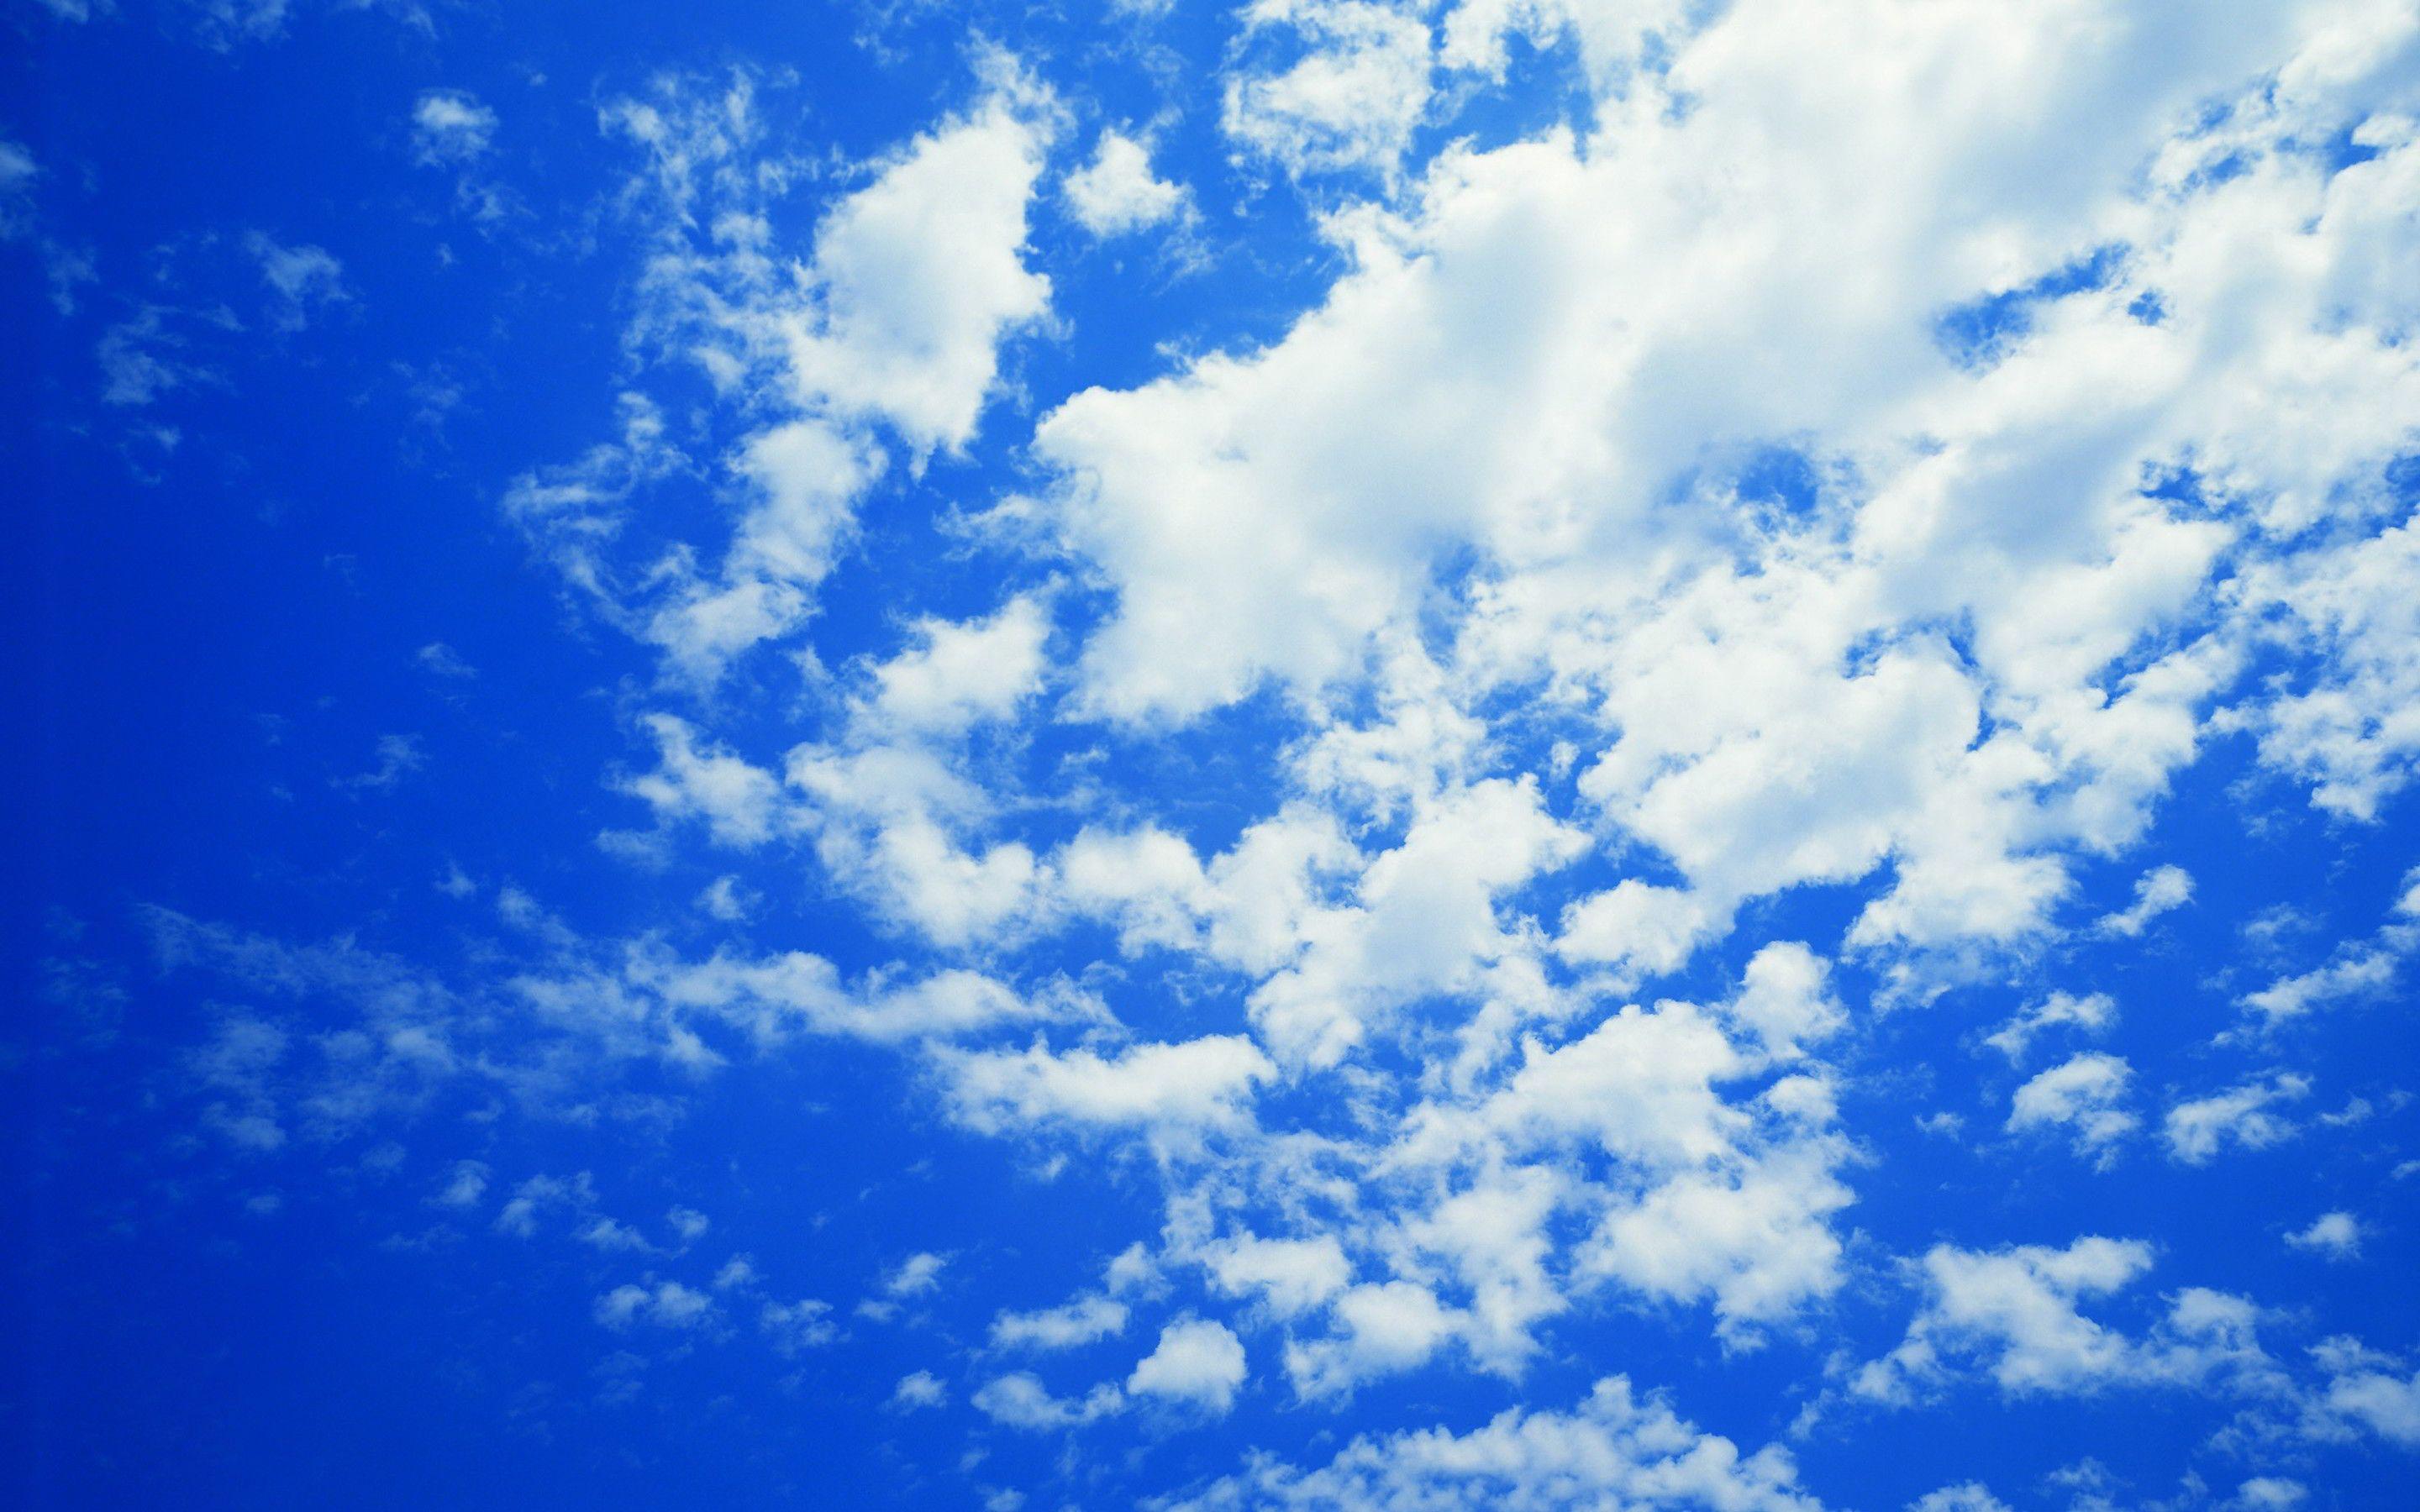 Blue Sky With Clouds Wallpapers - Wallpaper Cave